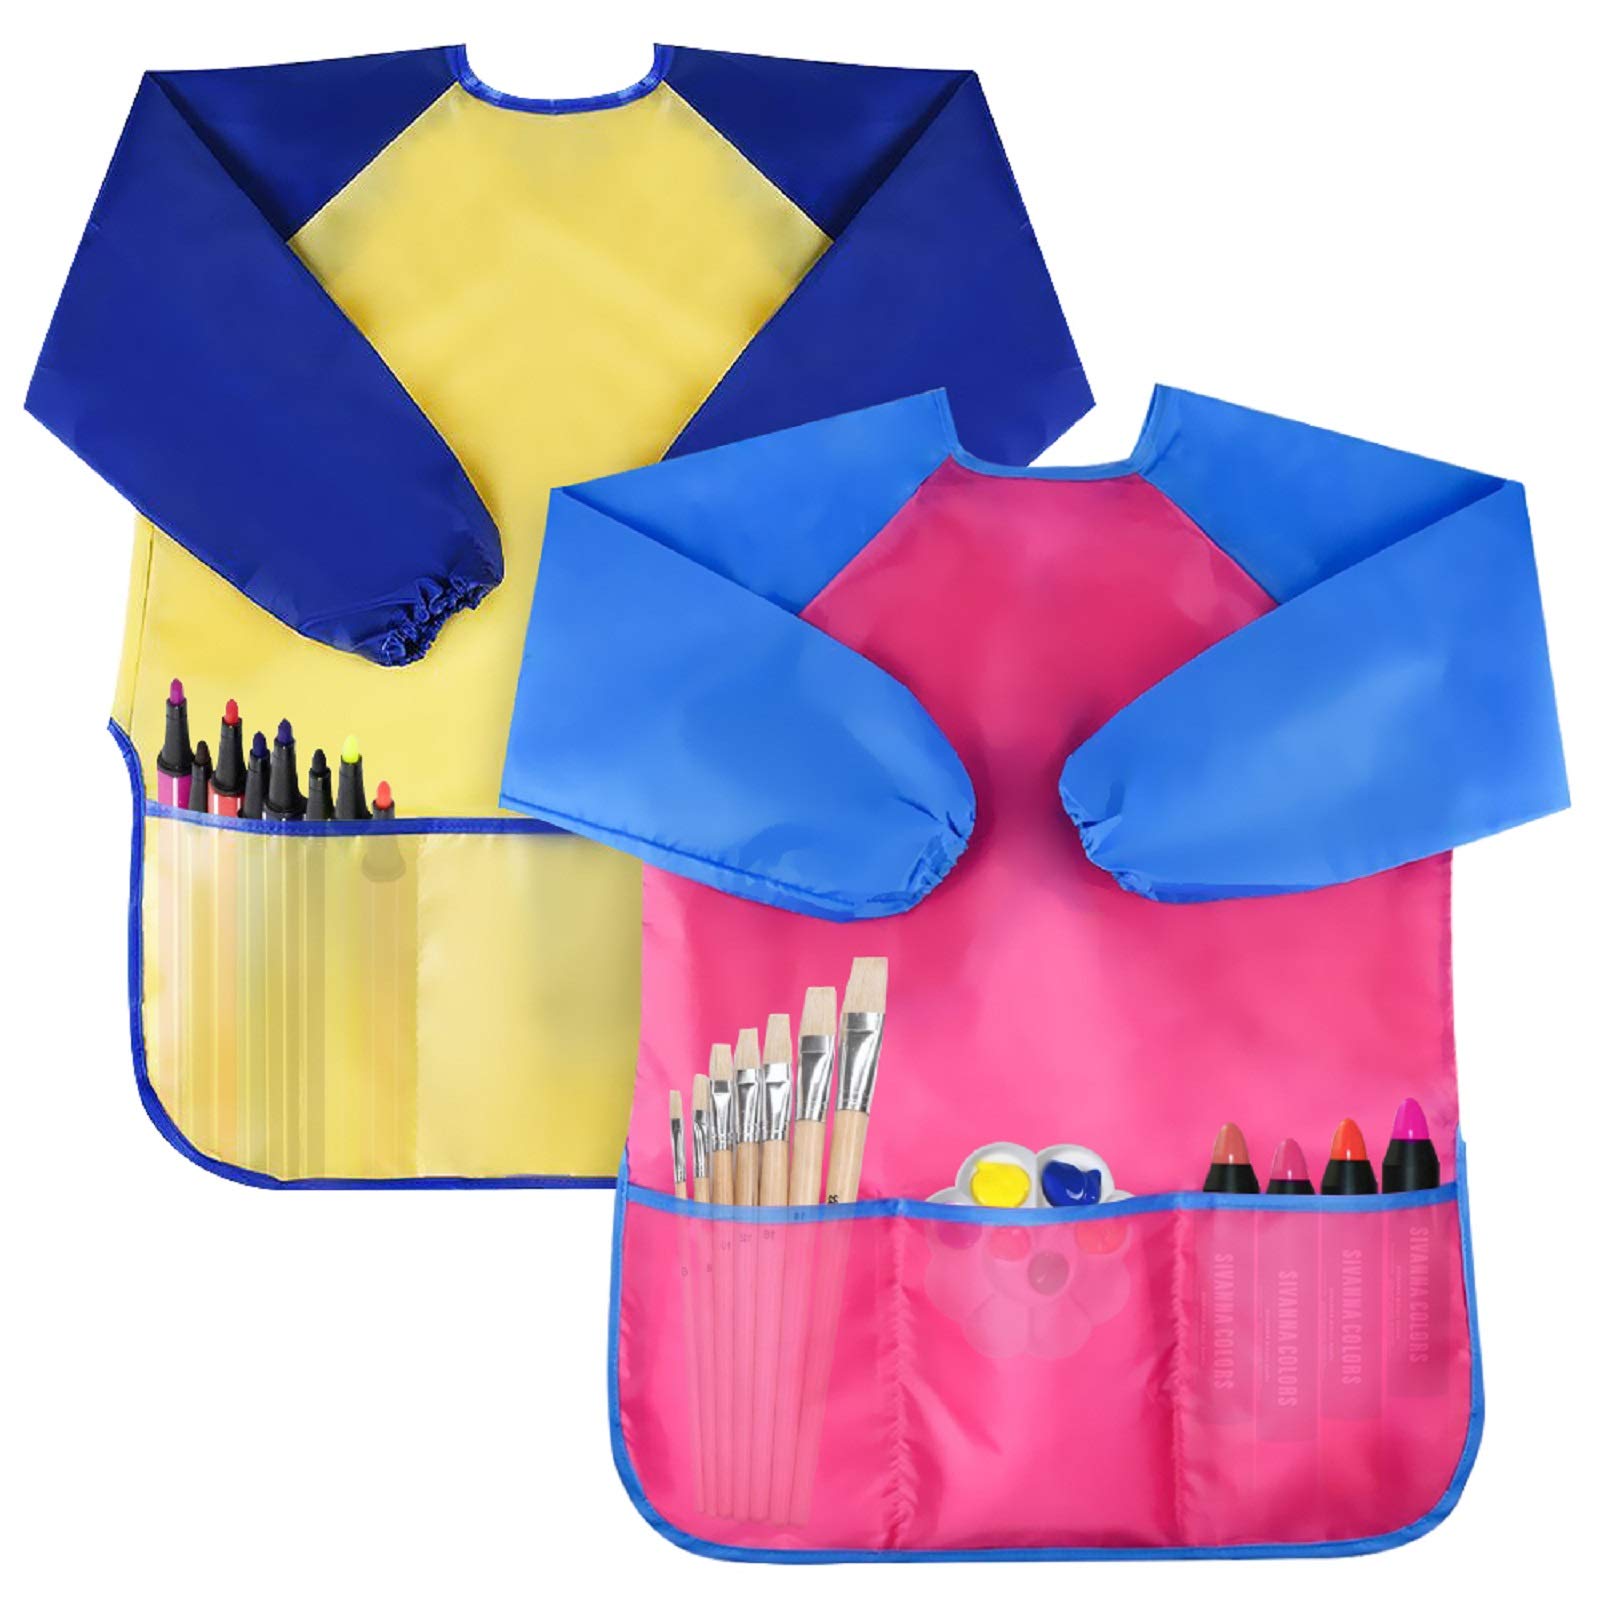 Bassion 2 Pack Kids Art Smocks Toddler Smock Waterproof Artist Painting Aprons Long Sleeve with 3 Pockets for Age 2-6 Years Gifts(yellow pink)